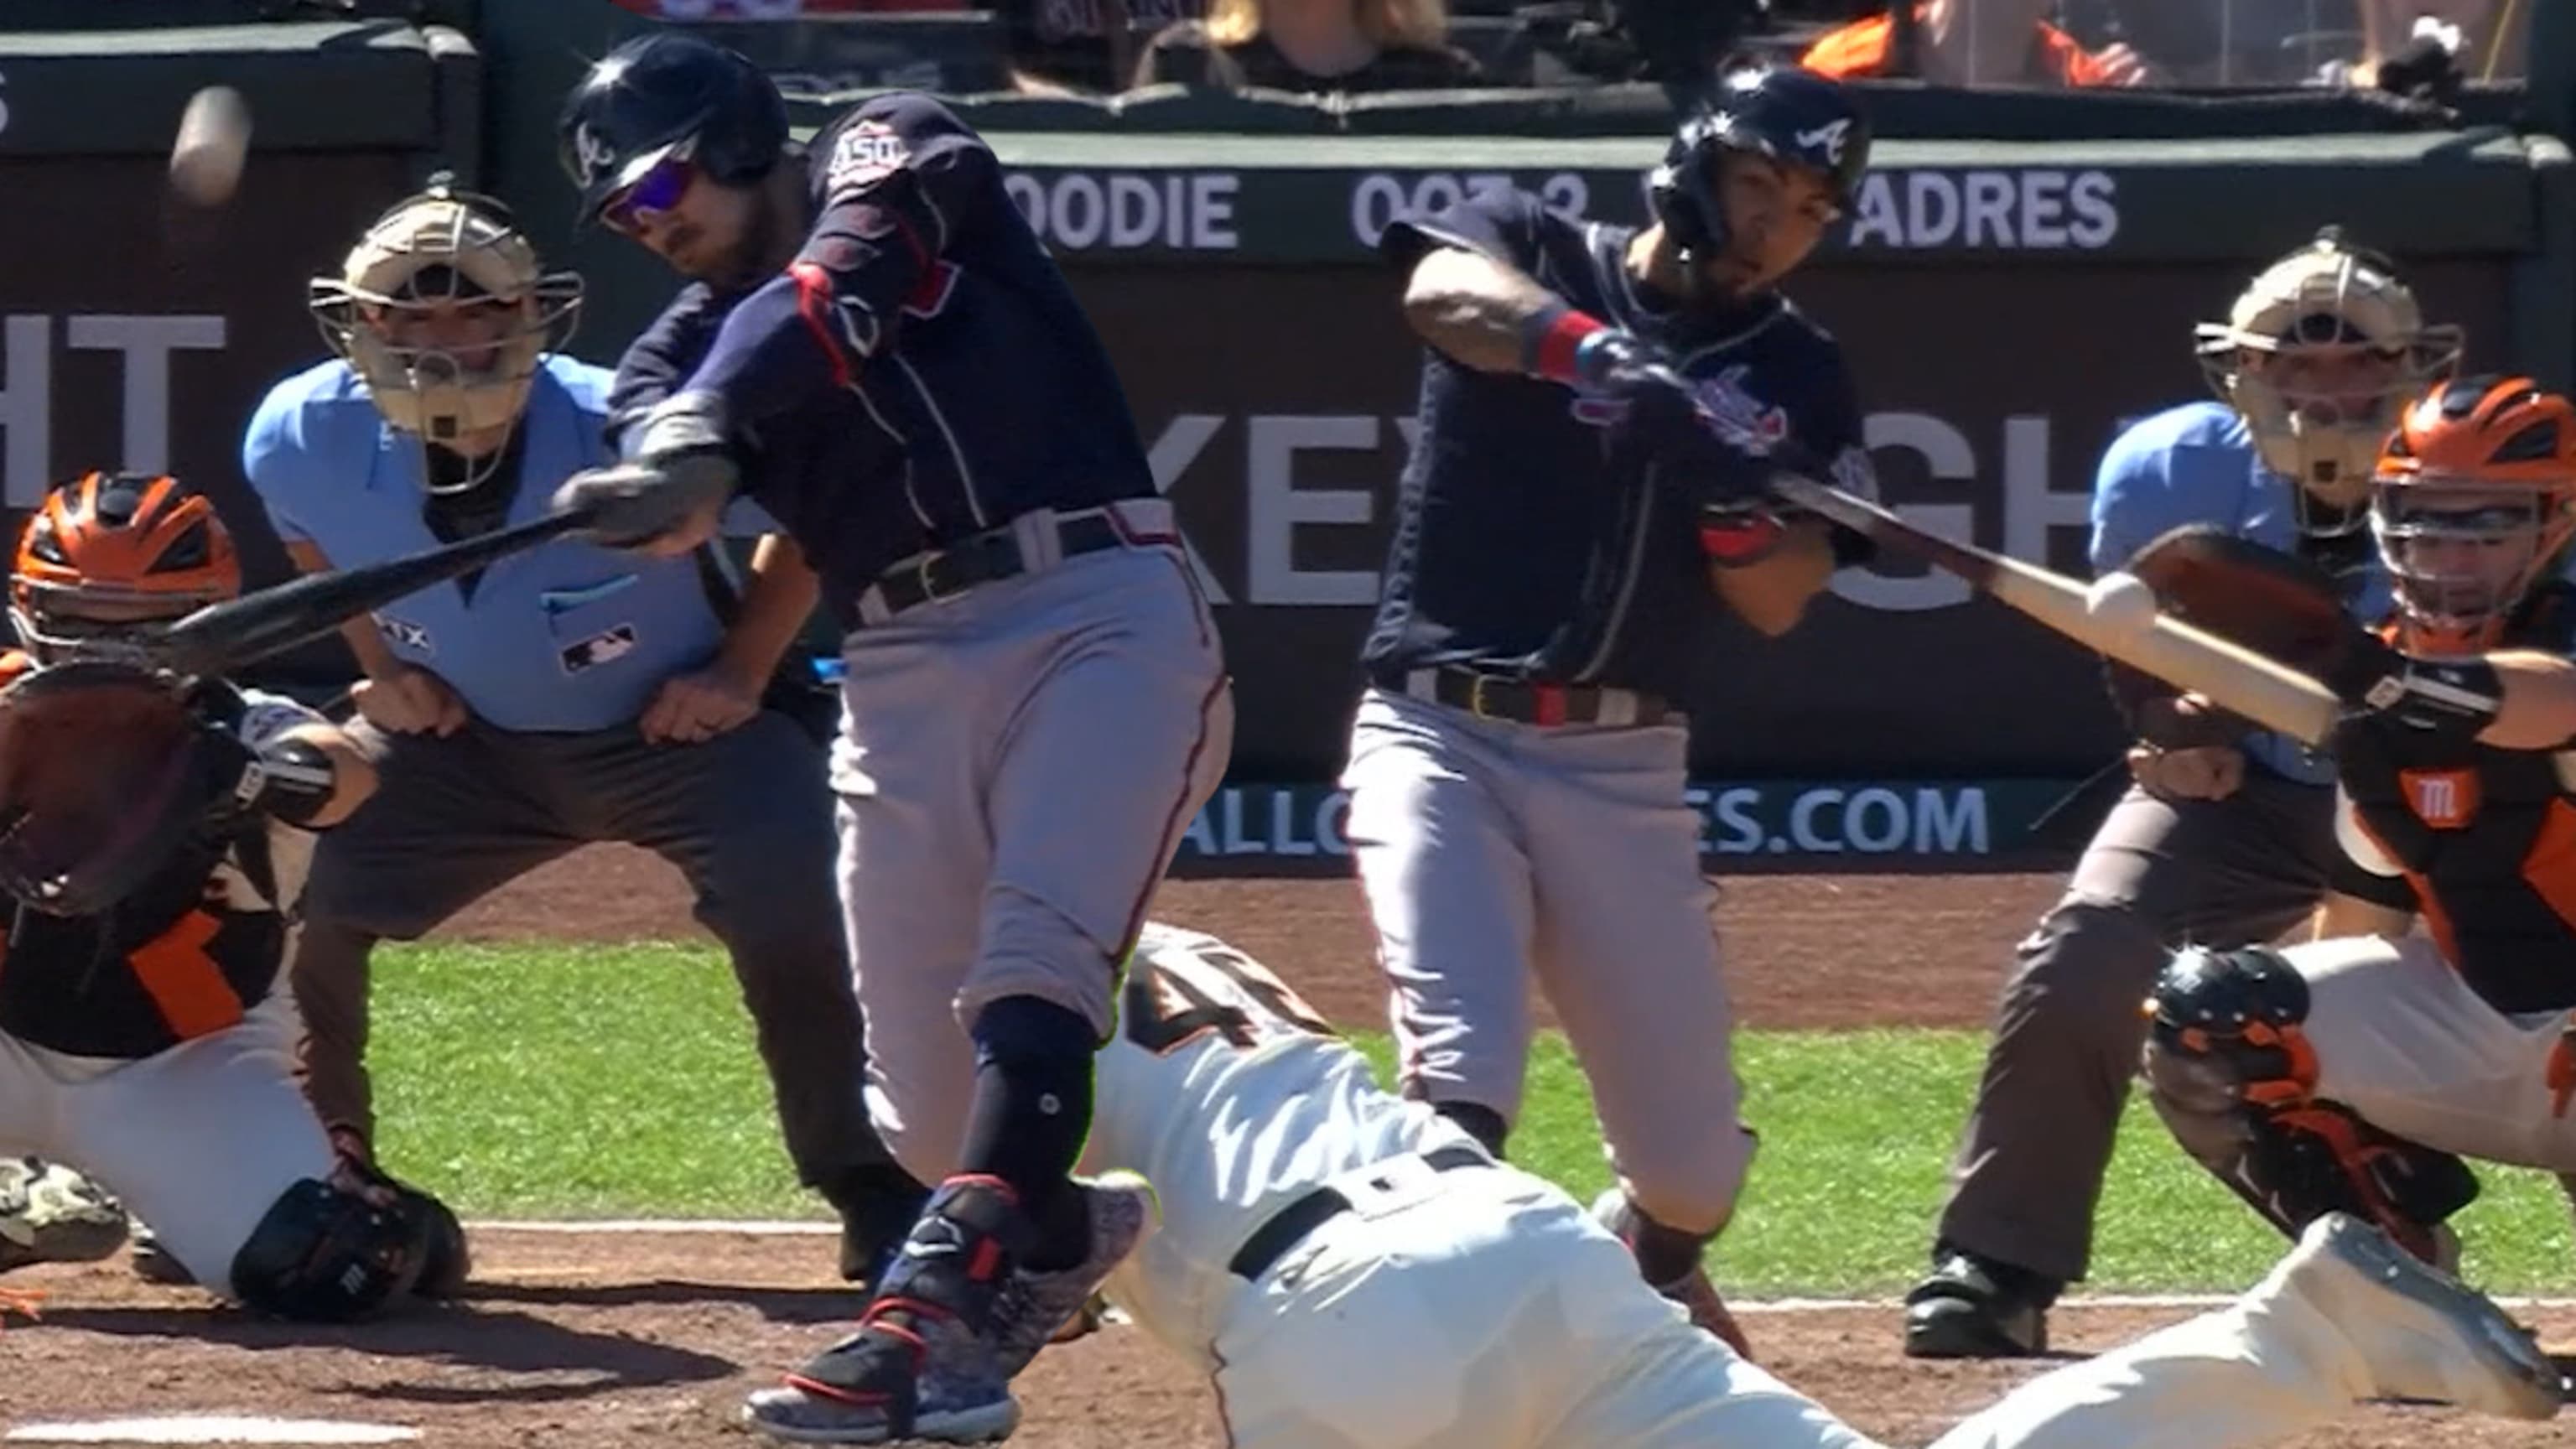 Some of the most absurd home runs Eddie Rosario has hit against